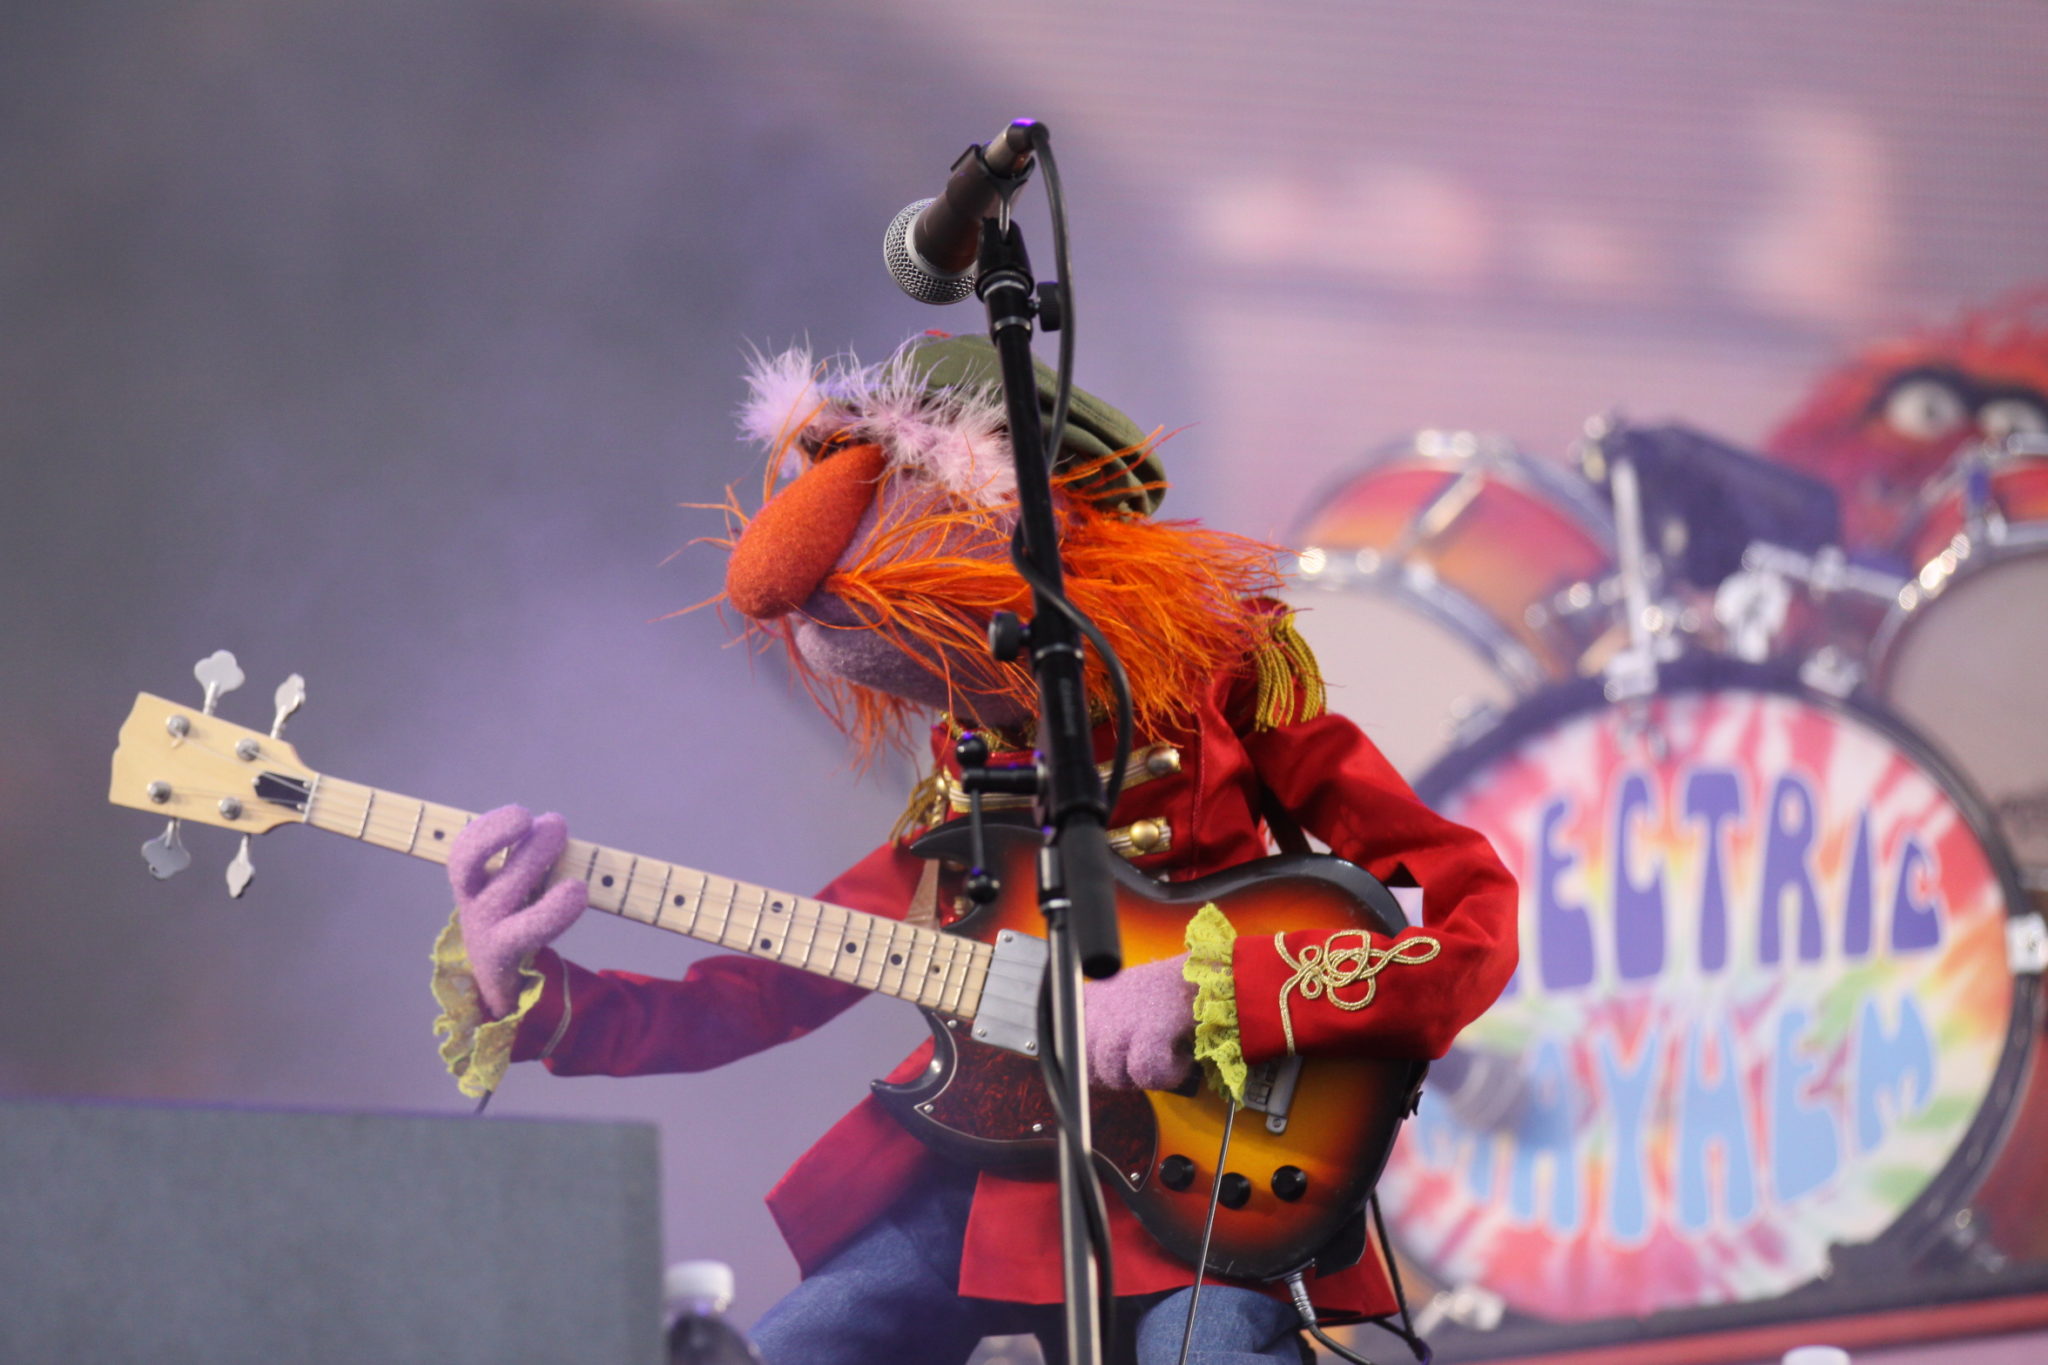 The Muppets live onstage at the 2016 Outside Lands Music Festival in Golden Gate Park